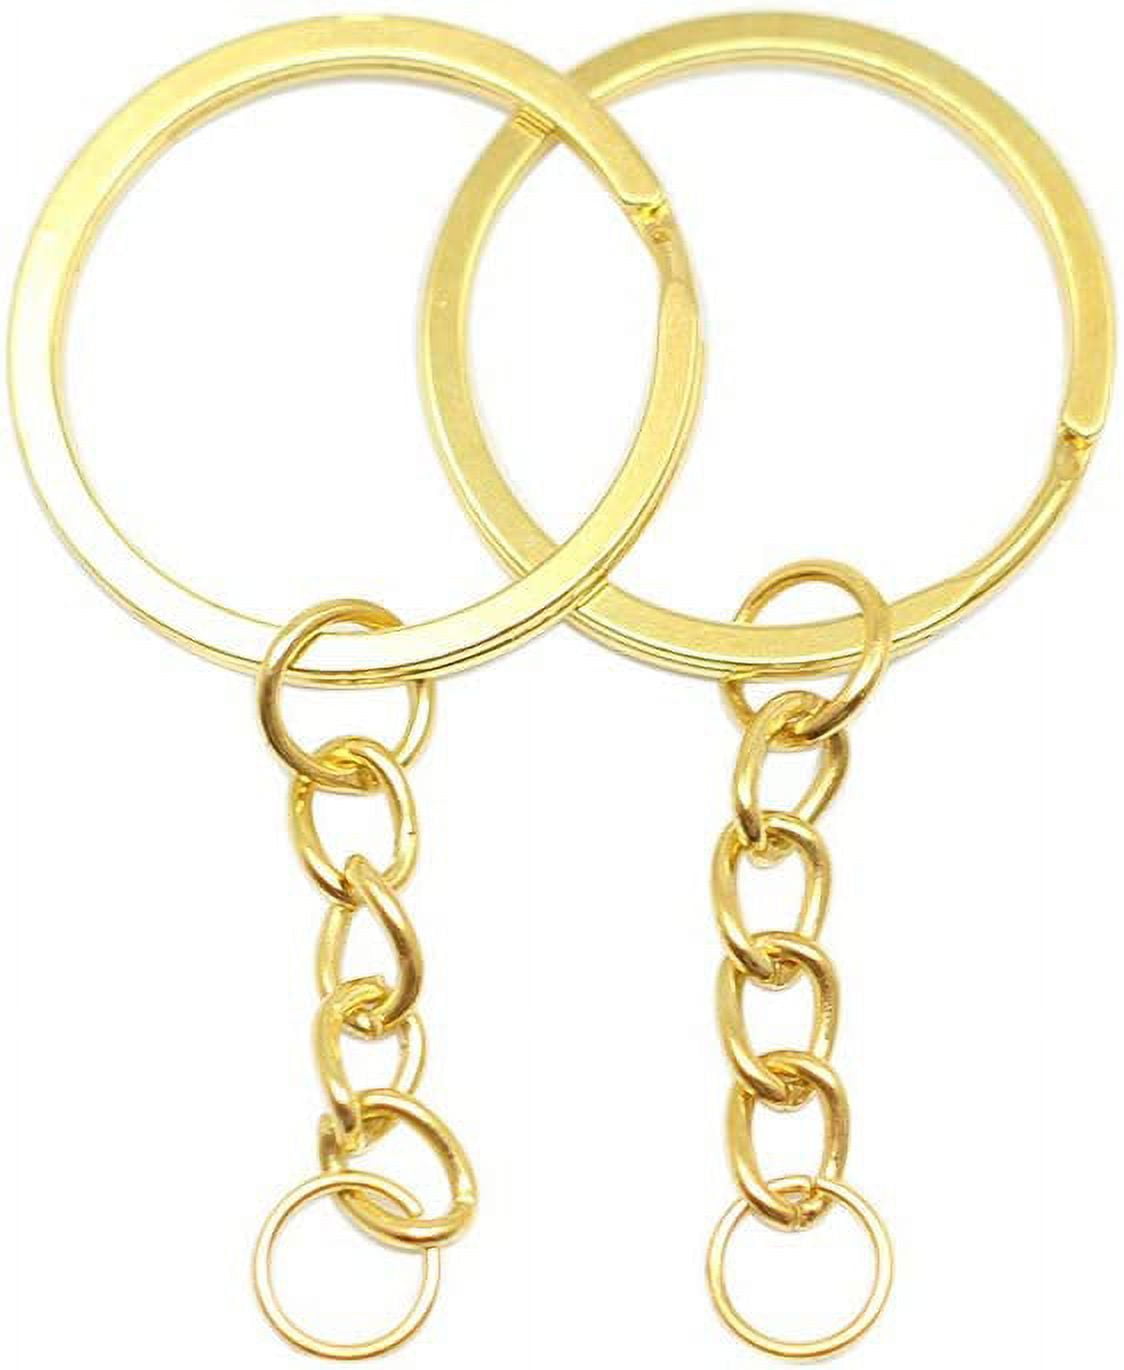 200pcs of 10mm Tiny Key Rings Gold and Light Gold Split Rings Key Rings Small  Key Rings 